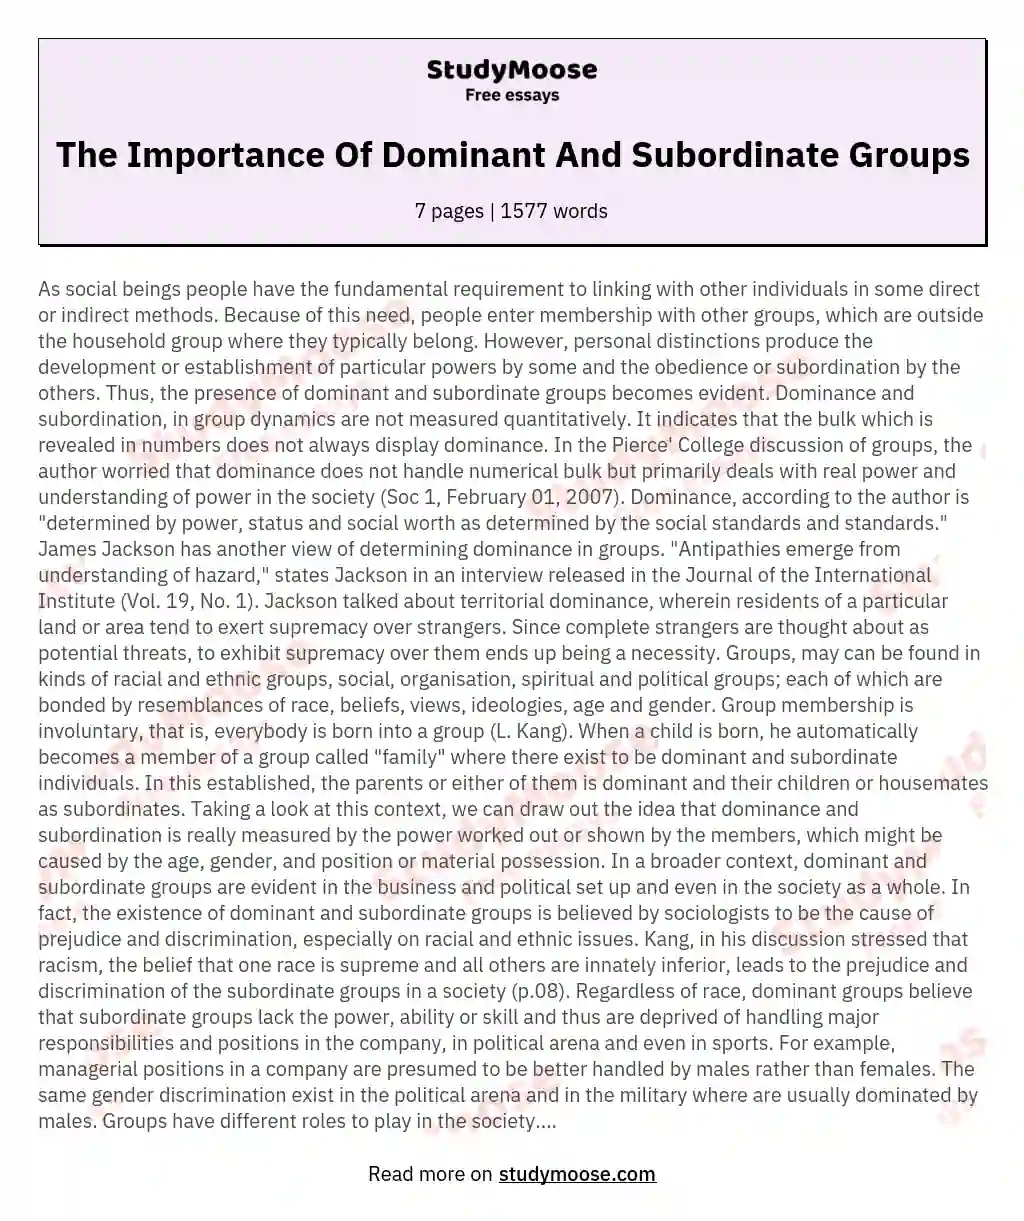 The Importance Of Dominant And Subordinate Groups essay